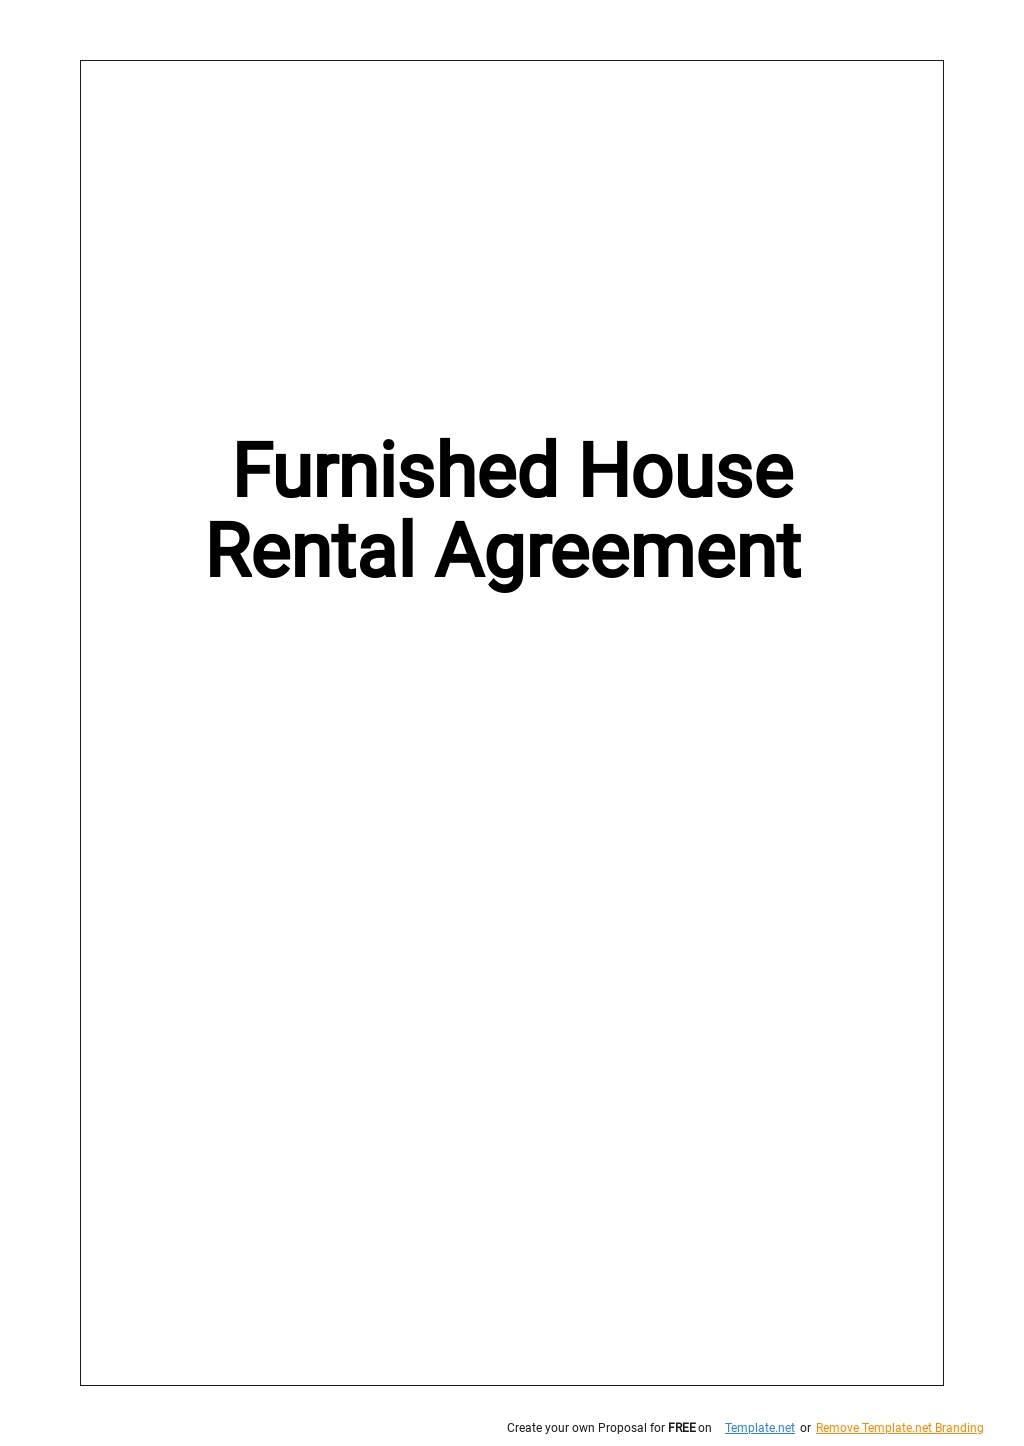 House Rental Agreement Template Google Docs Word Apple Pages 